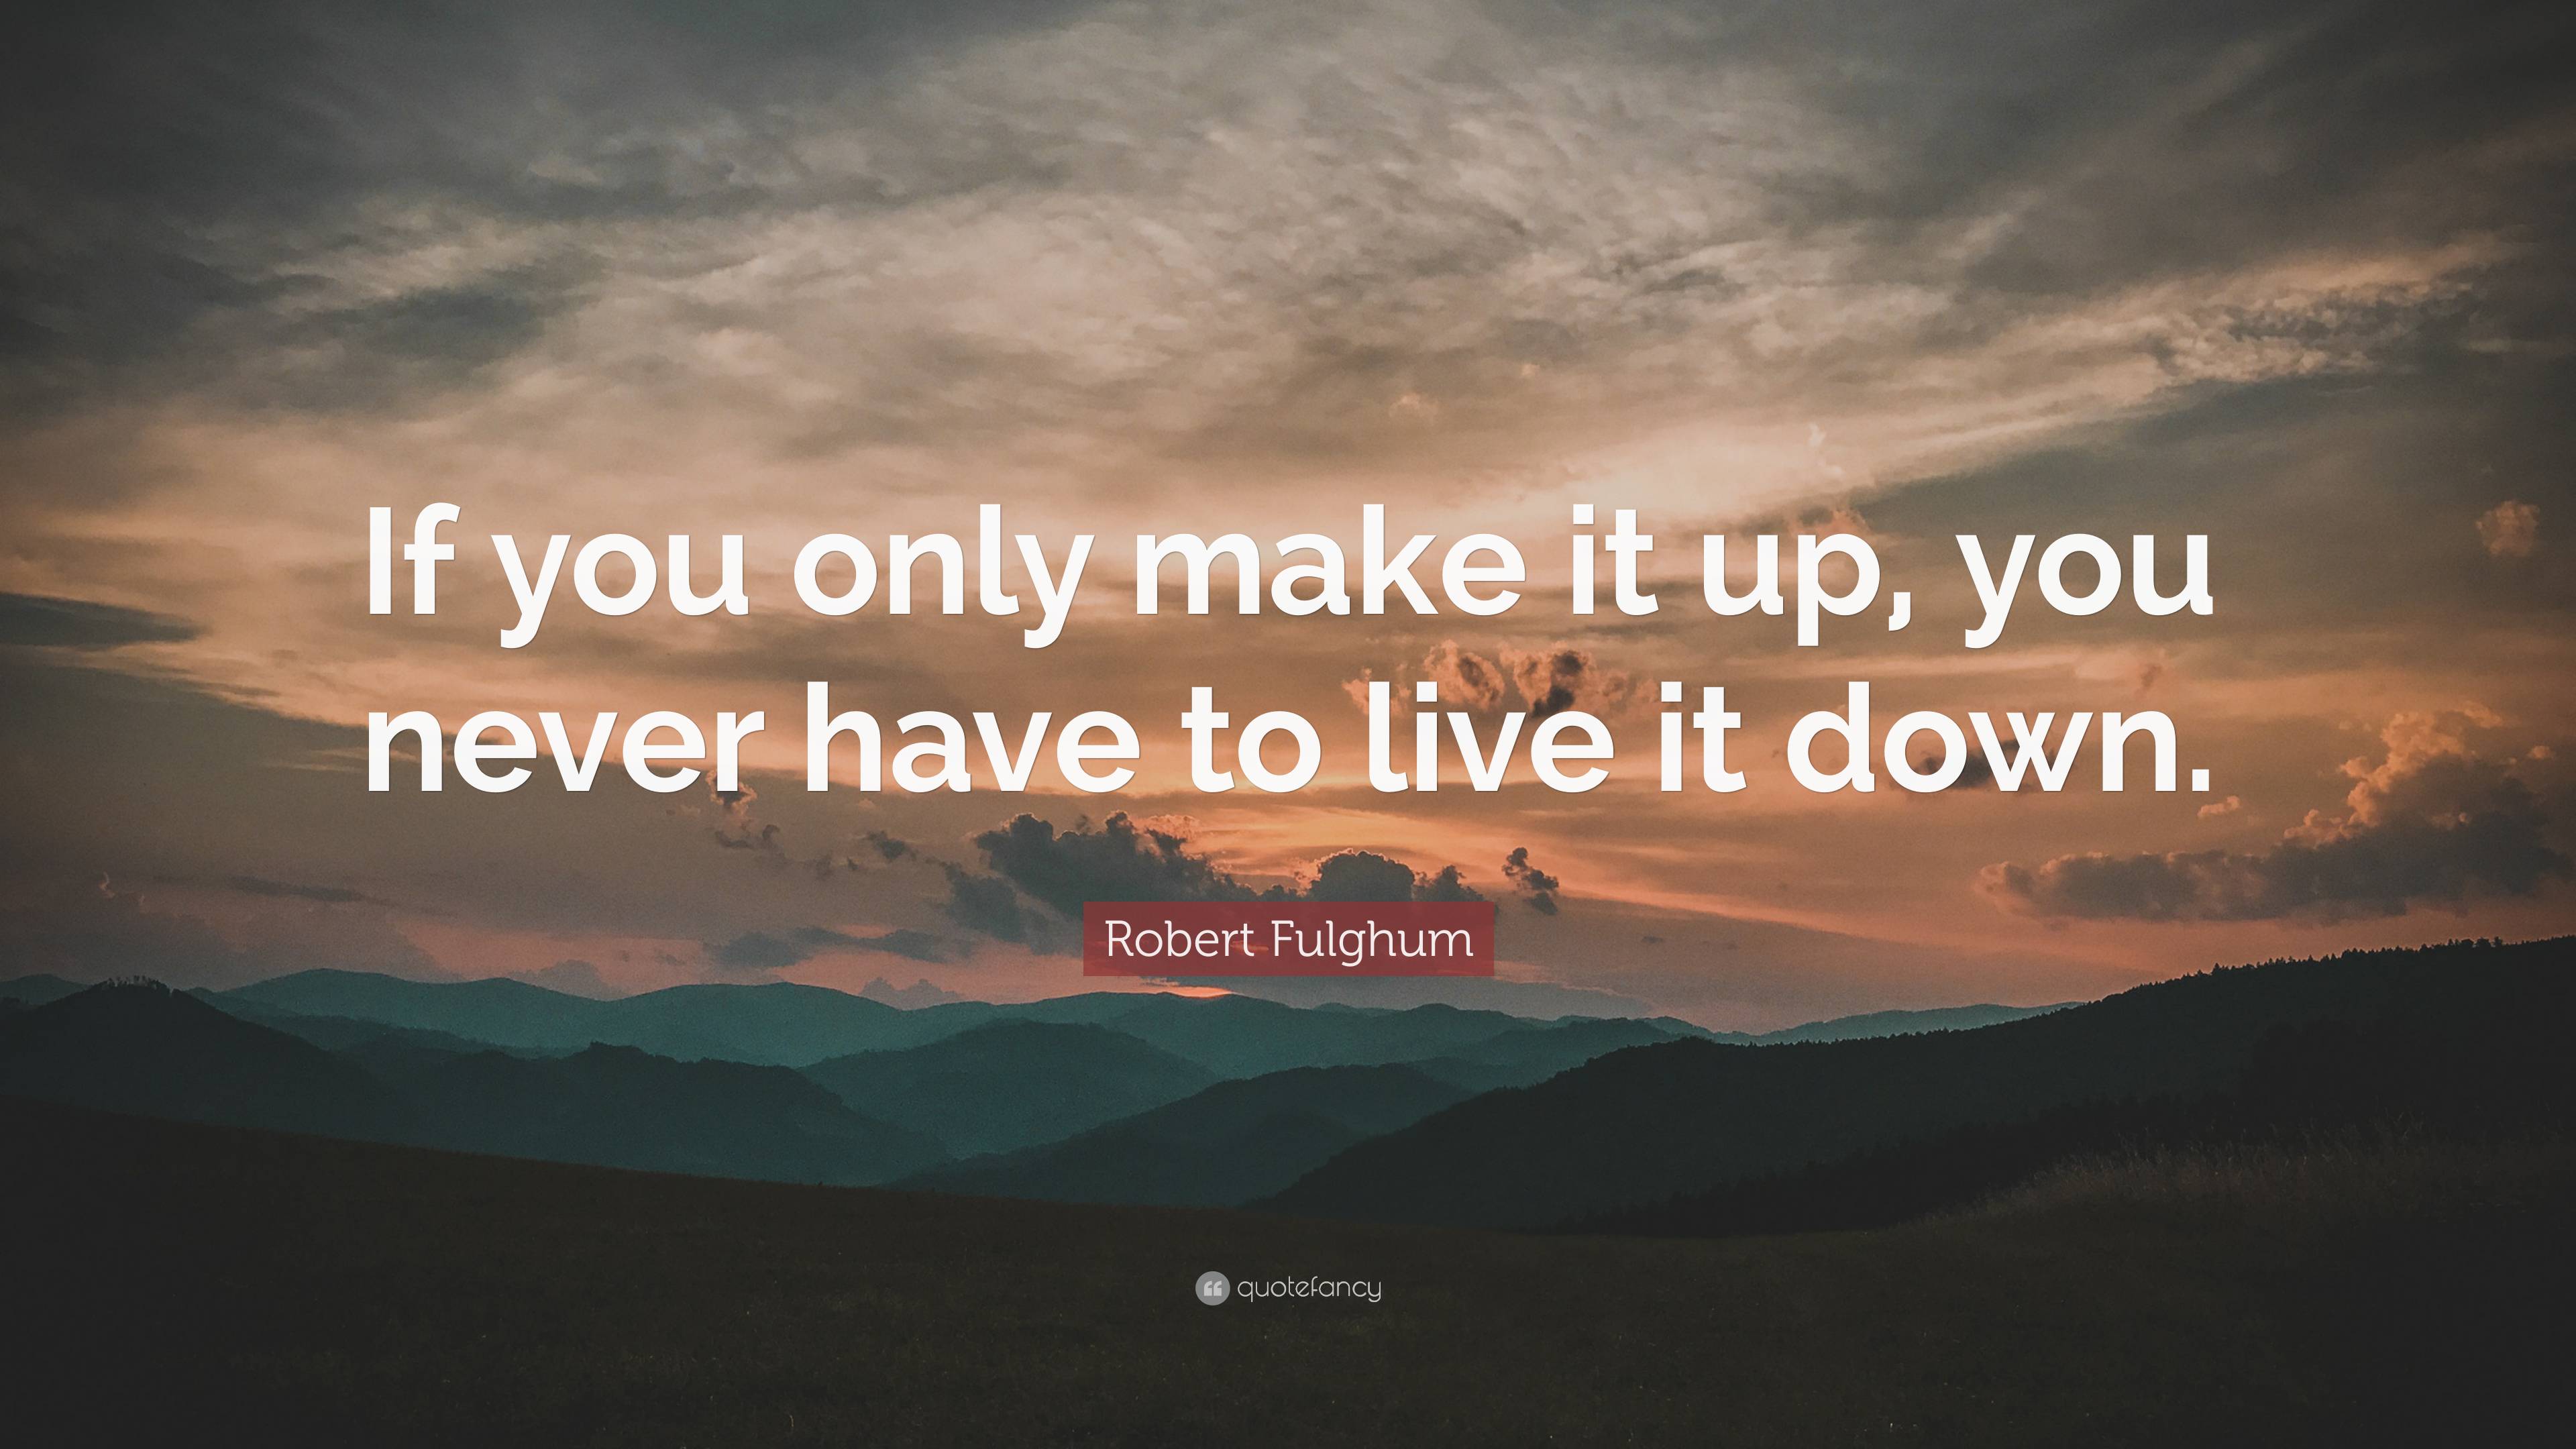 Robert Fulghum Quote: “If you only make it up, you never have to live ...